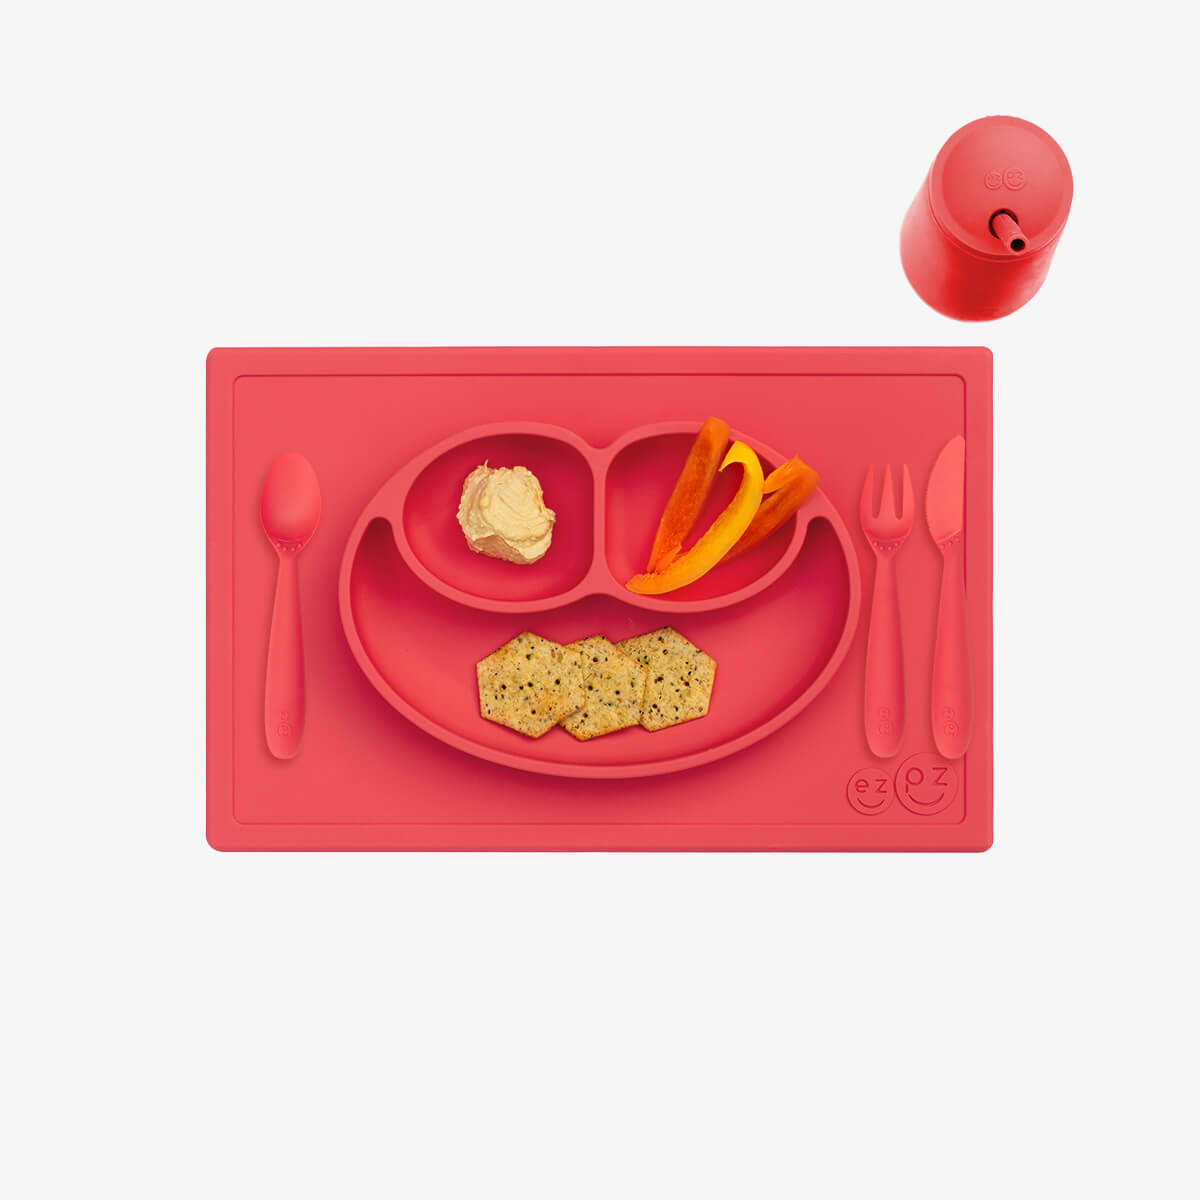 ezpz Happy Feeding Set in Coral / Silicone, Self-Suctioning Plate, Silicone Cup and Straw, Training Utensils for Toddlers